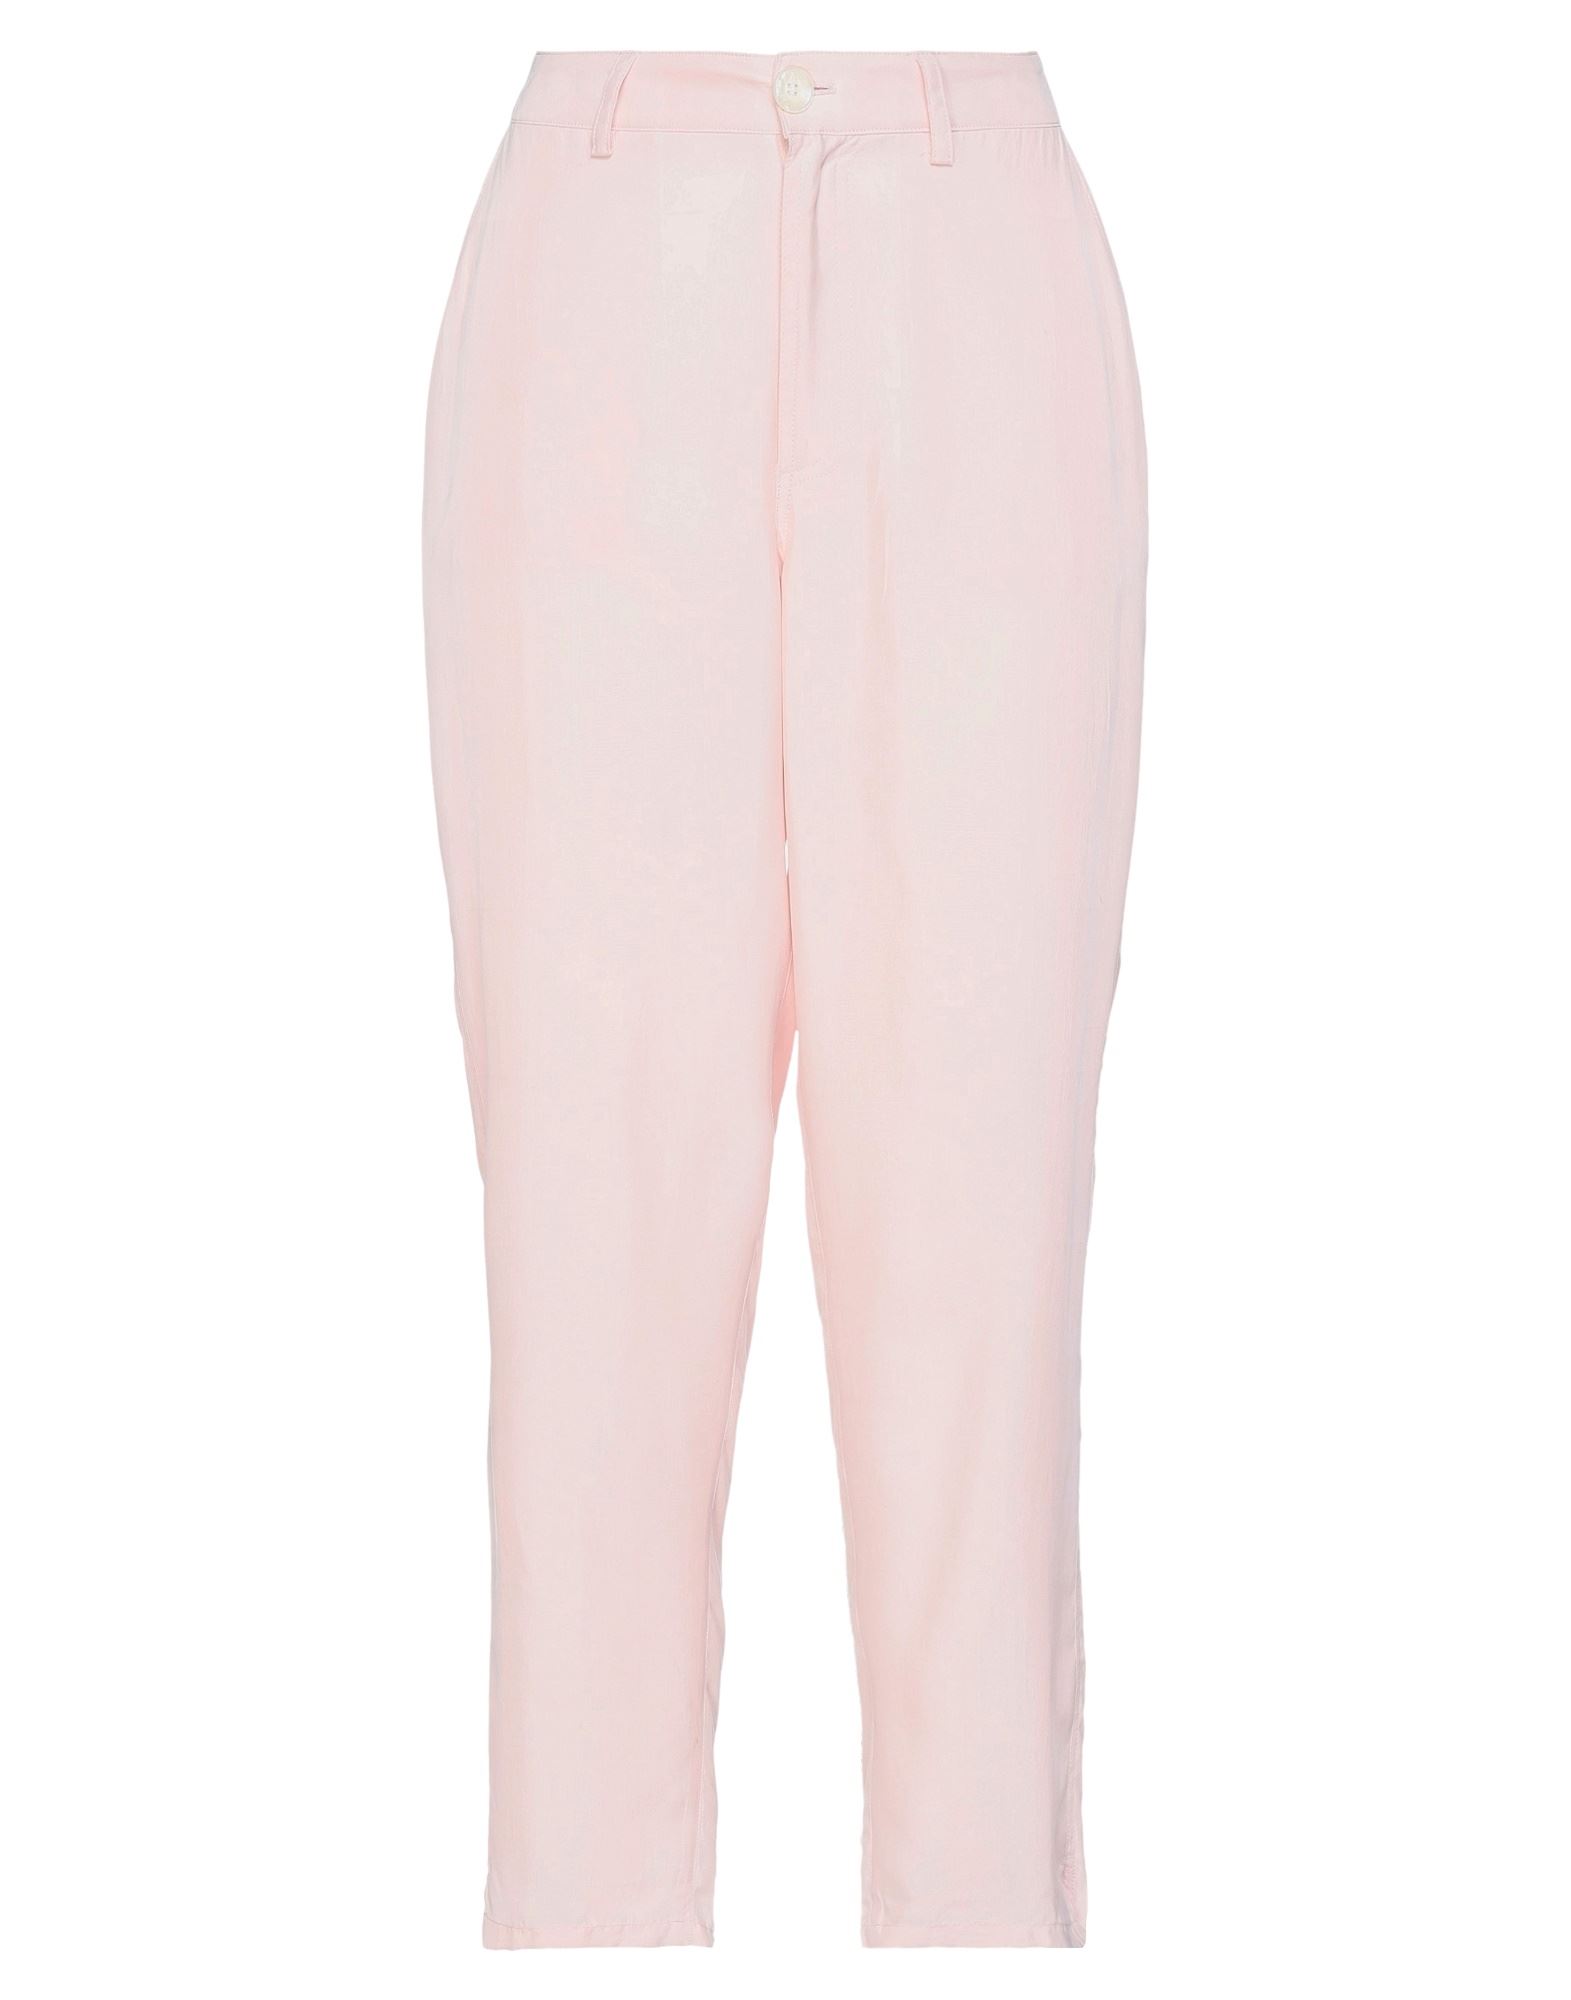 5preview Pants In Light Pink | ModeSens